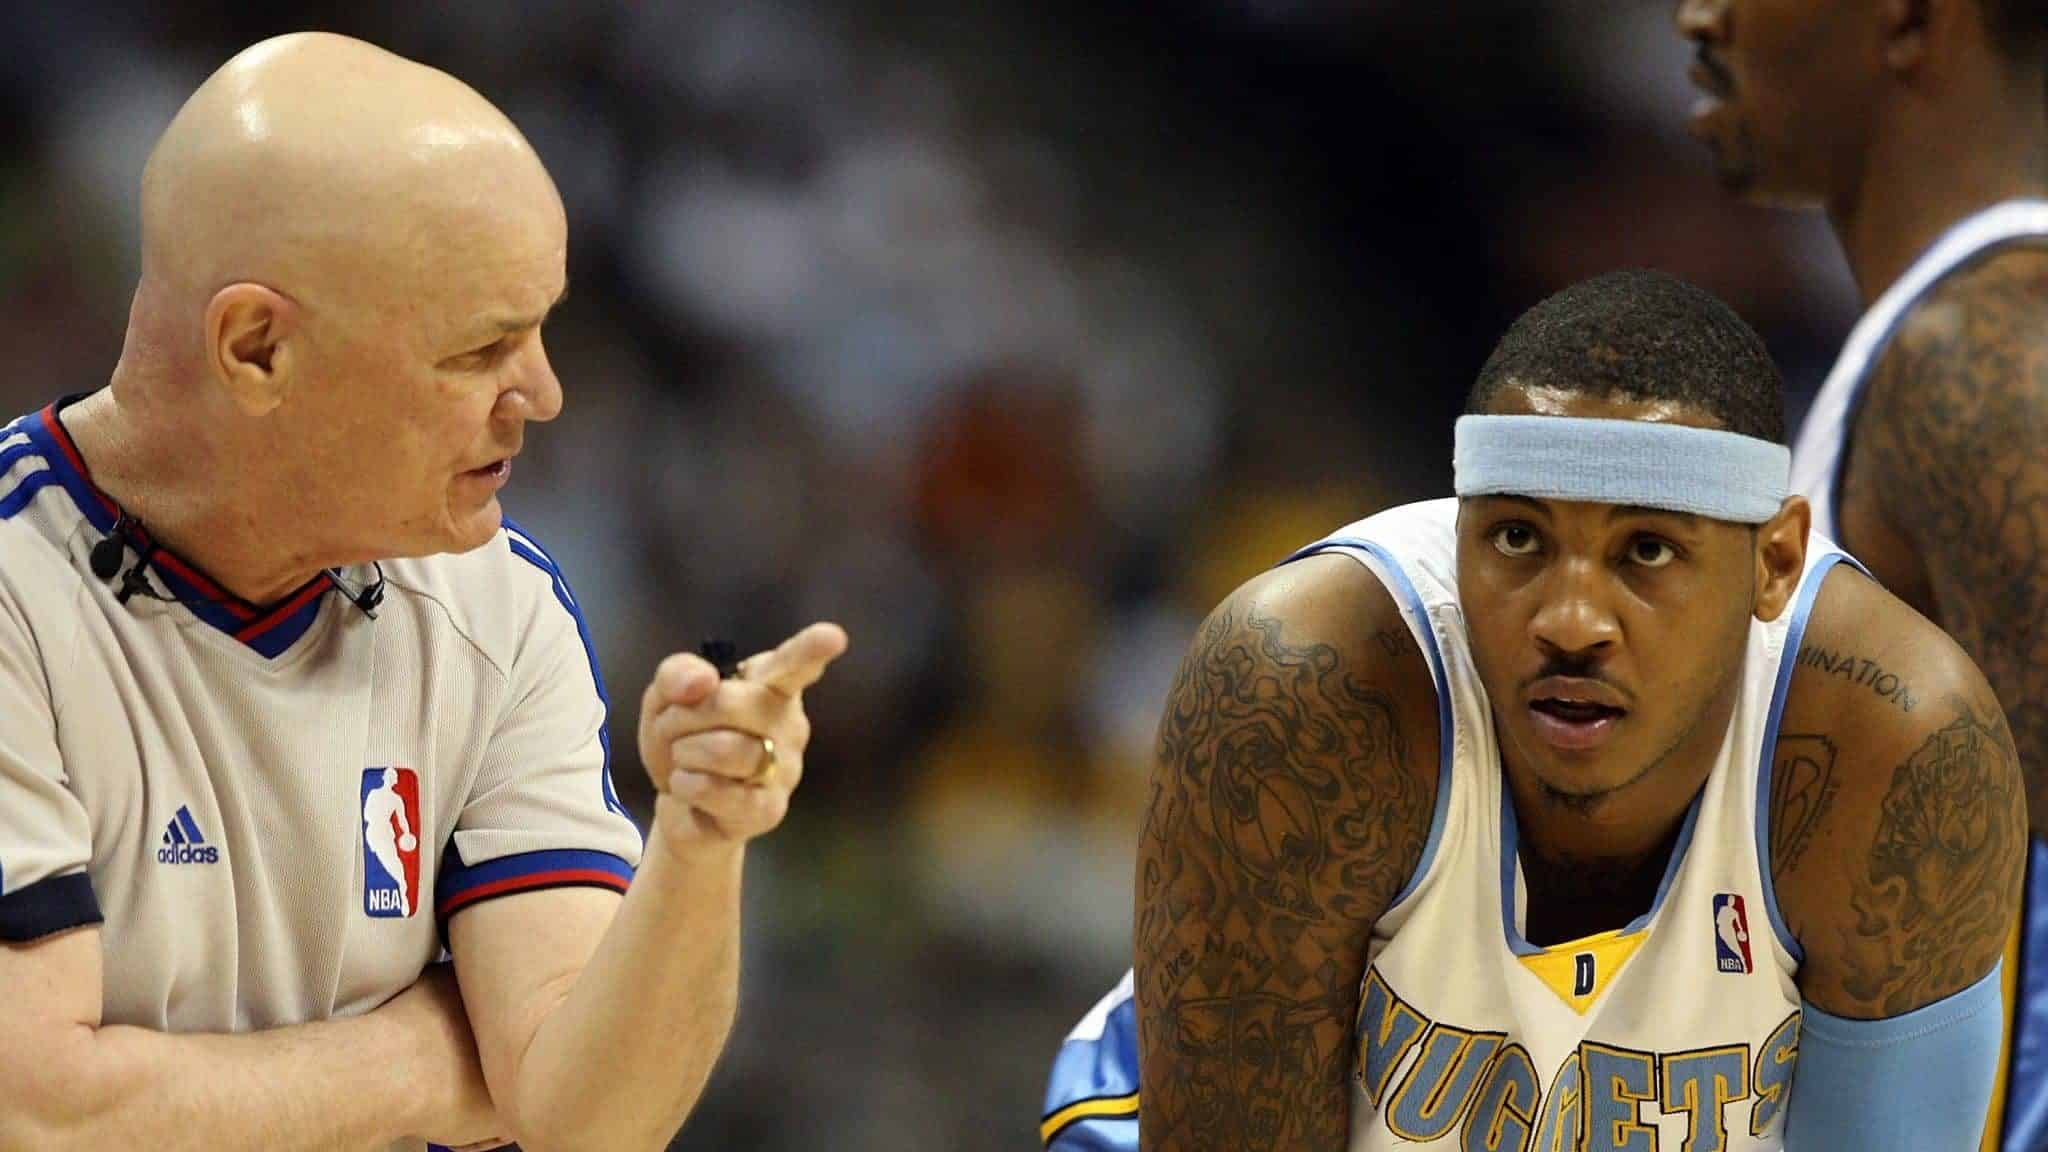 DENVER - MAY 29: Referee Joe Crawford talks with Carmelo Anthony #15 of the Denver Nuggets in Game Six of the Western Conference Finals during the 2009 NBA Playoffs against the Los Angeles Lakers at Pepsi Center on May 29, 2009 in Denver, Colorado. NOTE TO USER: User expressly acknowledges and agrees that, by downloading and or using this photograph, User is consenting to the terms and conditions of the Getty Images License Agreement.